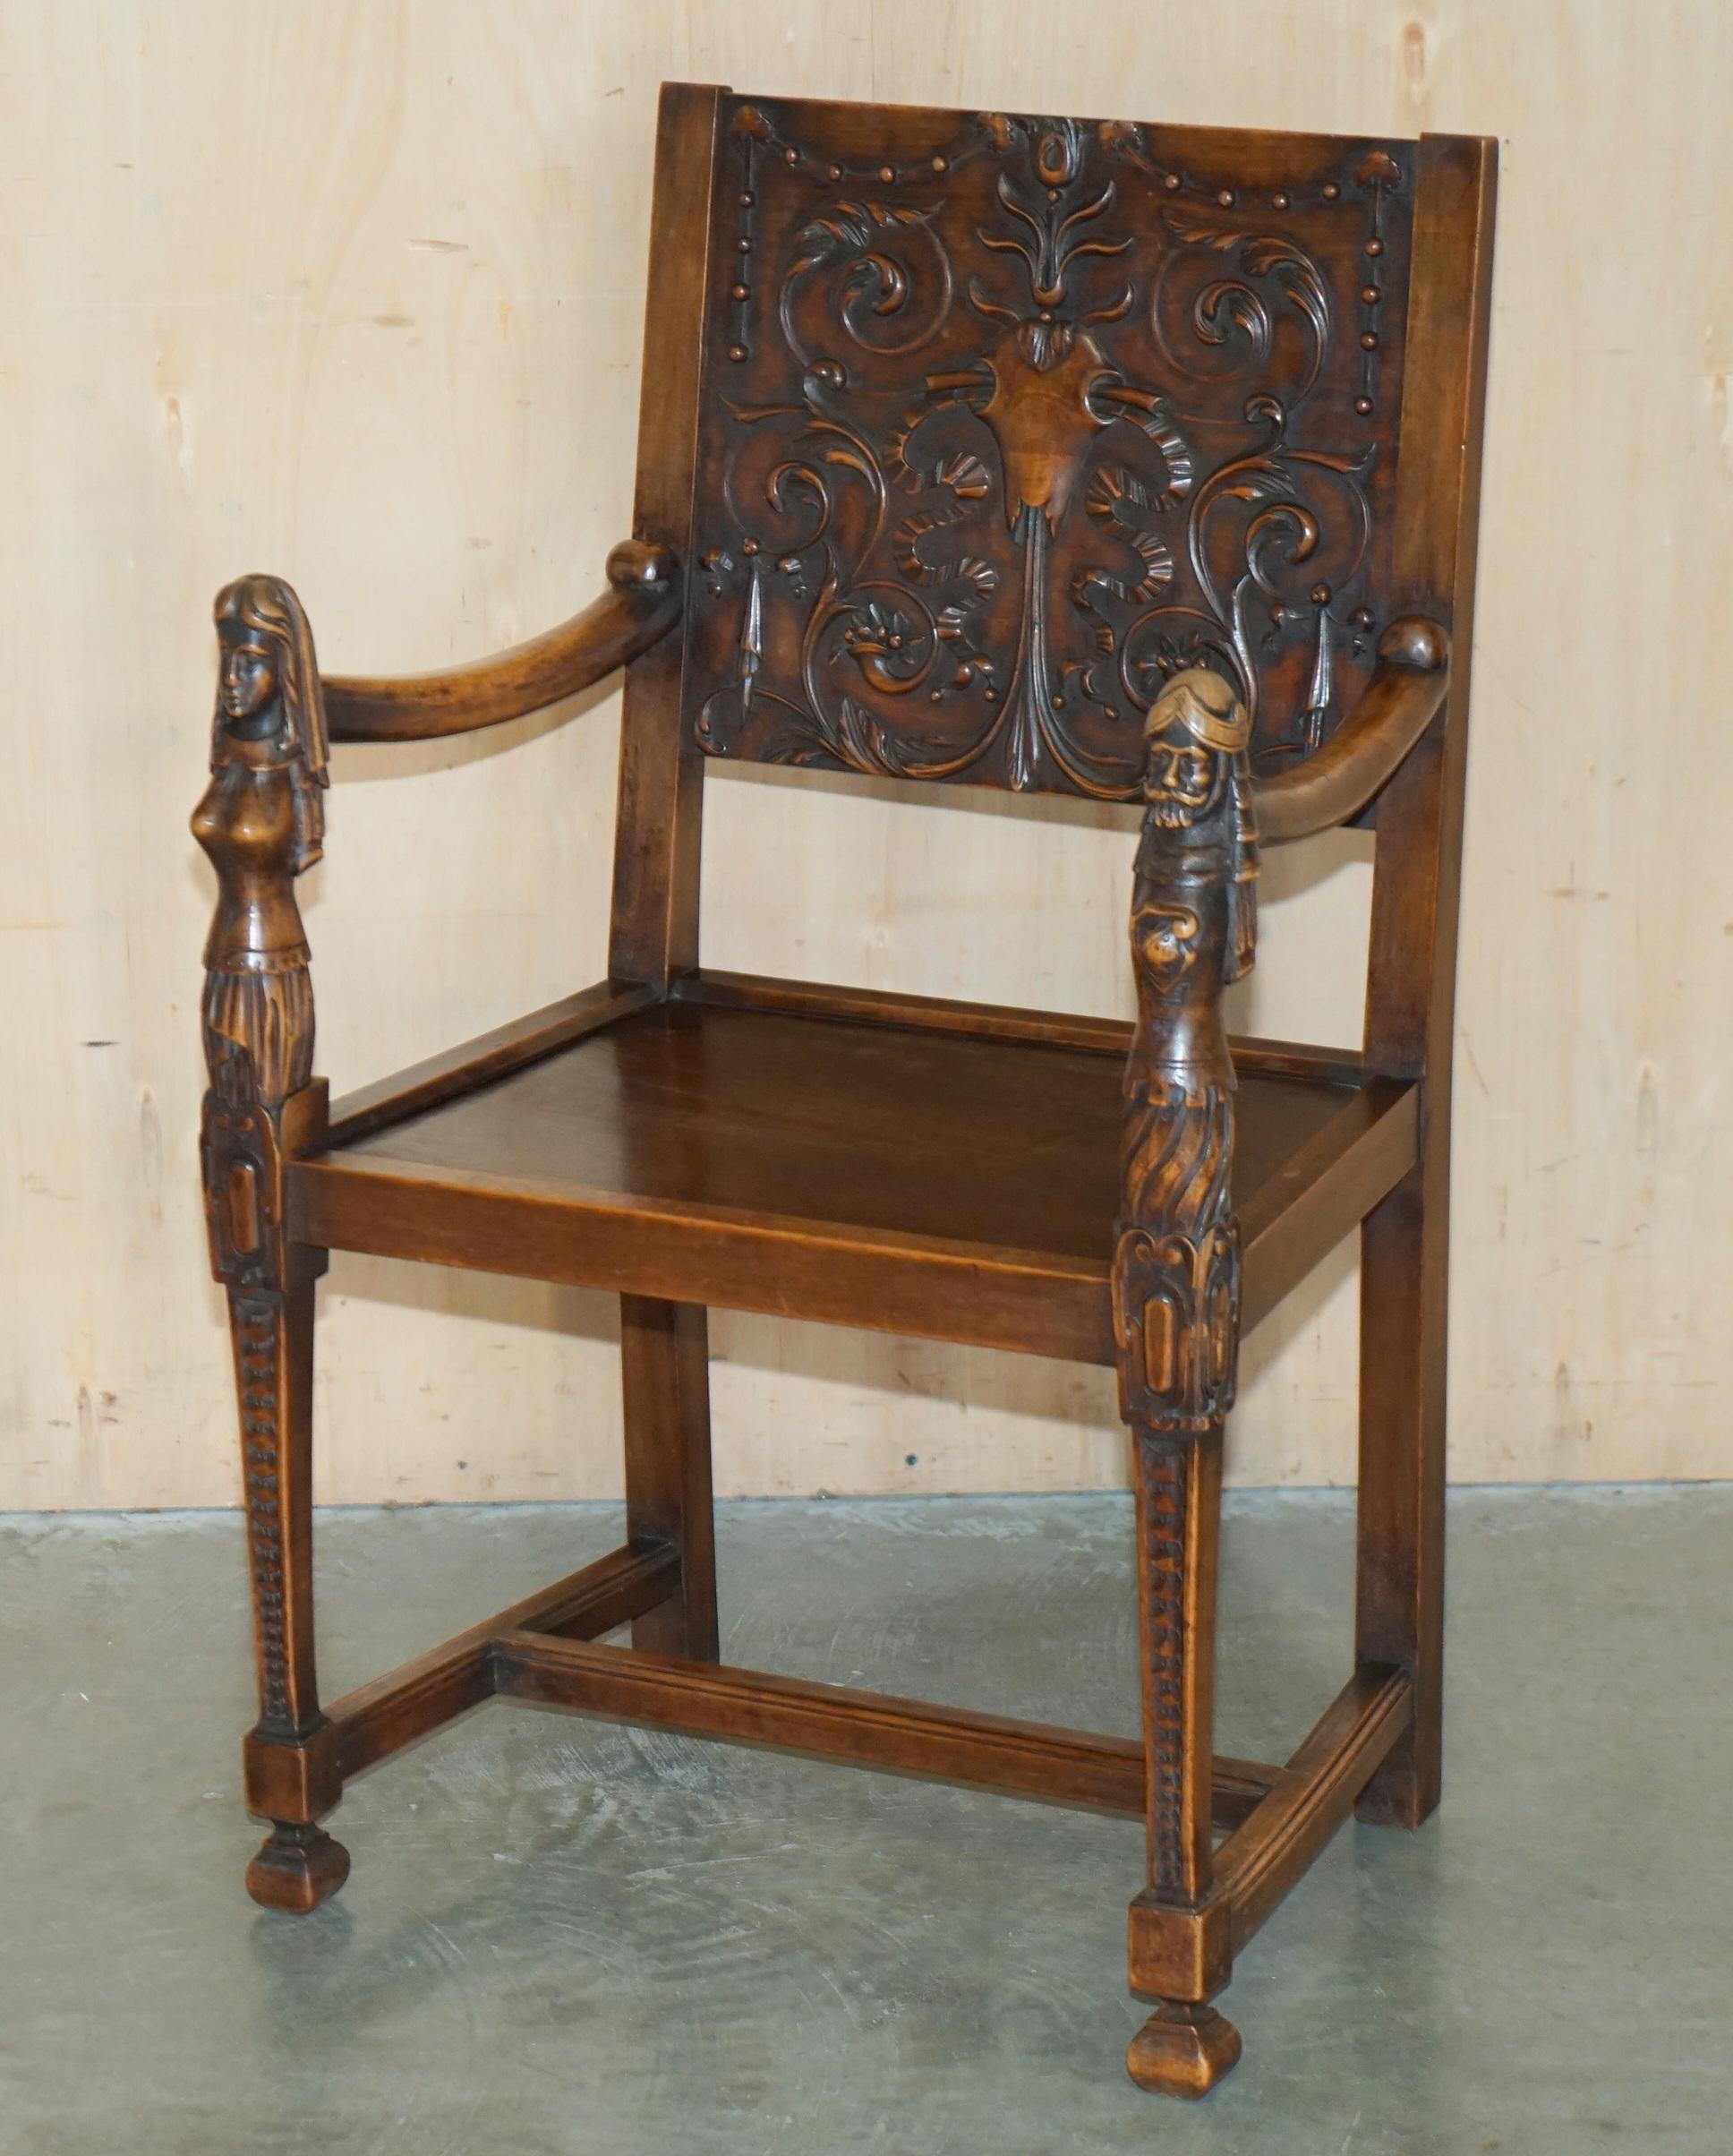 PAIR OF ORNATELY CARved NEO-GOTHIC SOLiD WALNUT 19TH CENTURY CEREMONY ARMCHAIRS im Angebot 4